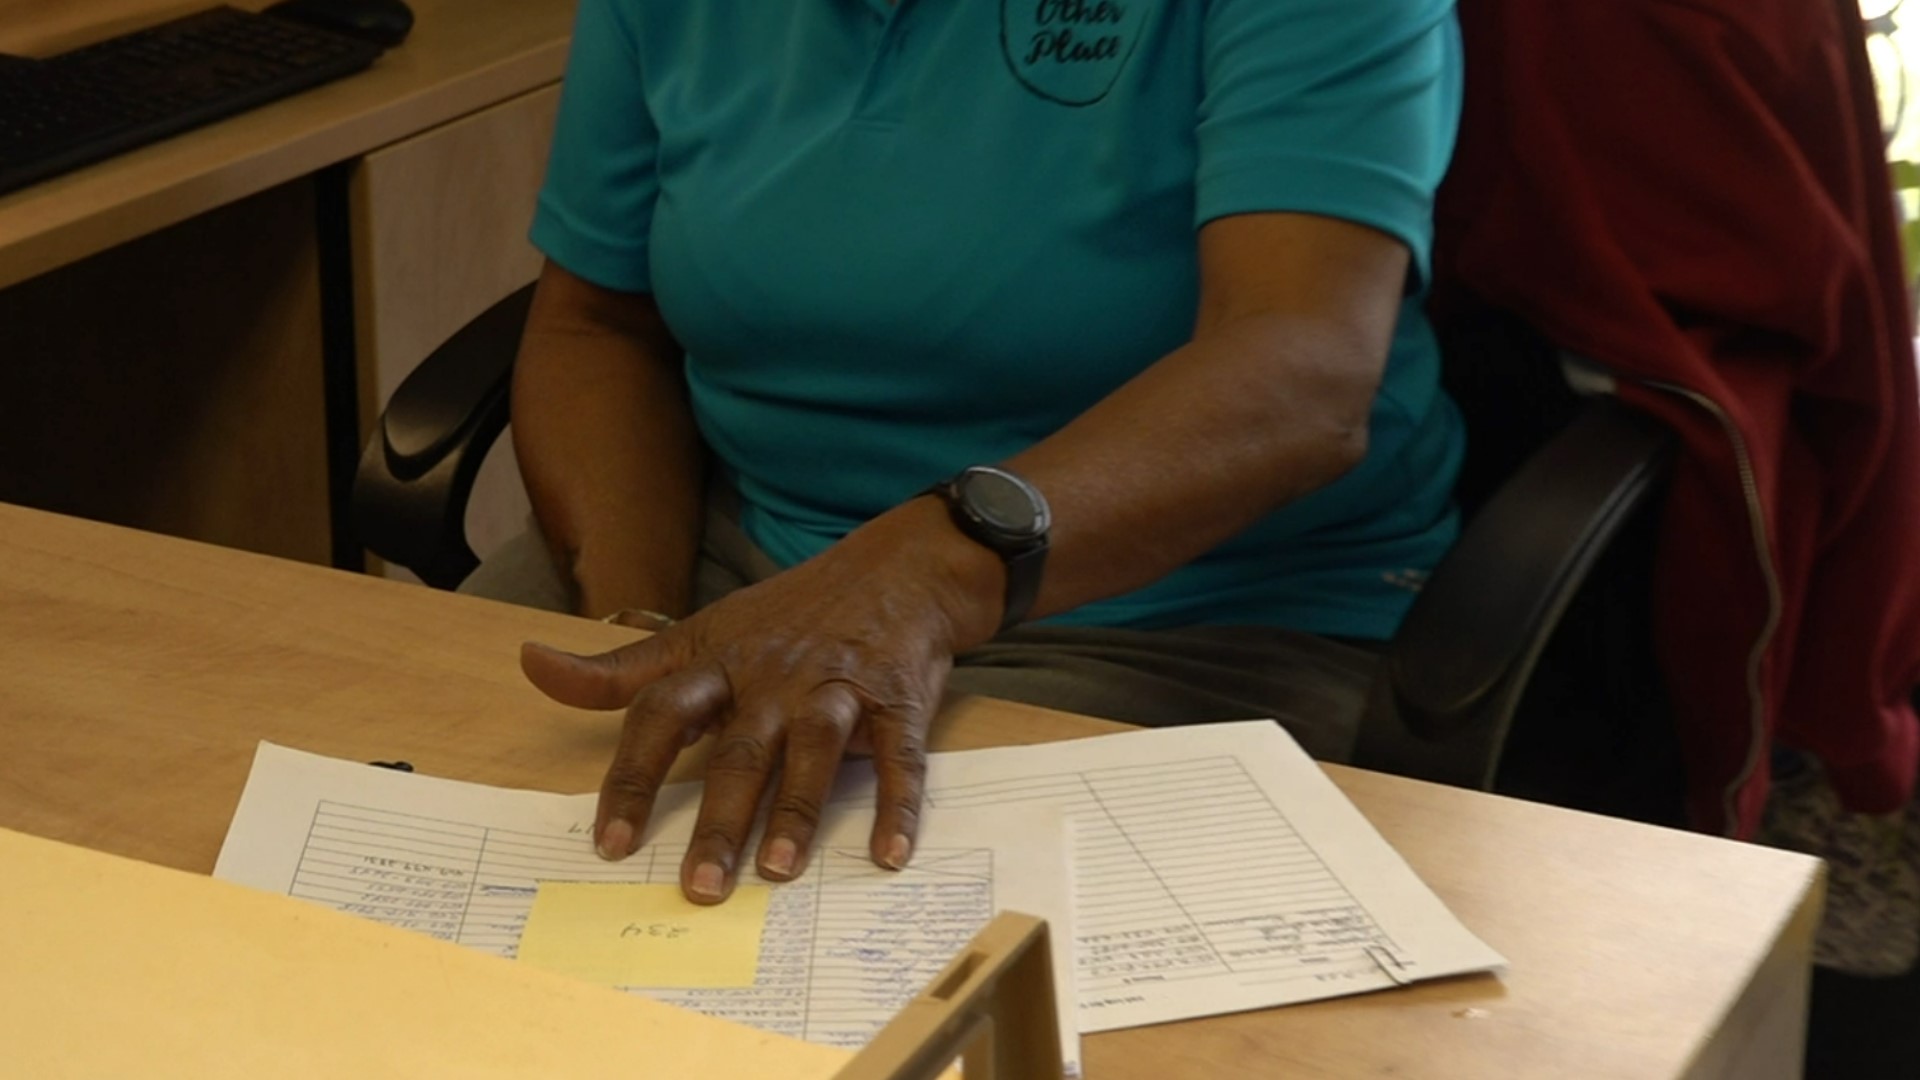 Jefferson County Precinct 1 Constable Jevonne Pollard said on average she went from serving 70 eviction notices a month to more than 200 a month.